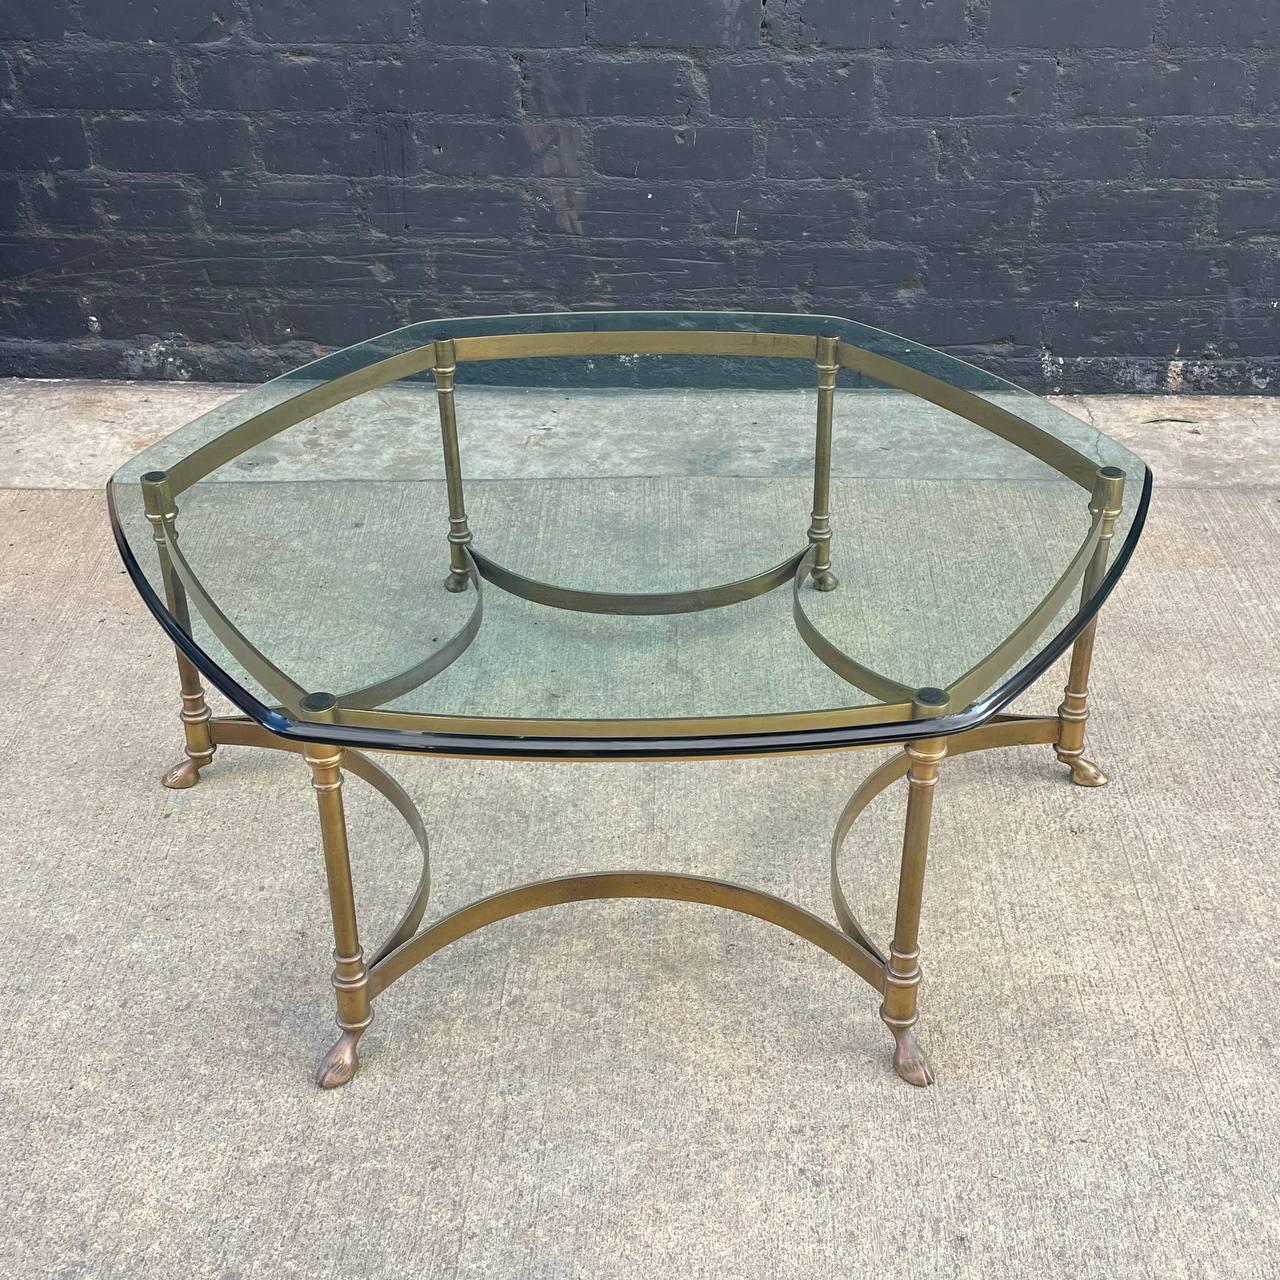 Mid-Century Modern Italian Brass & Glass Coffee Table with Hoof Feet

Original Vintage Condition

Dimensions: 15”H x 39”W x 39”D